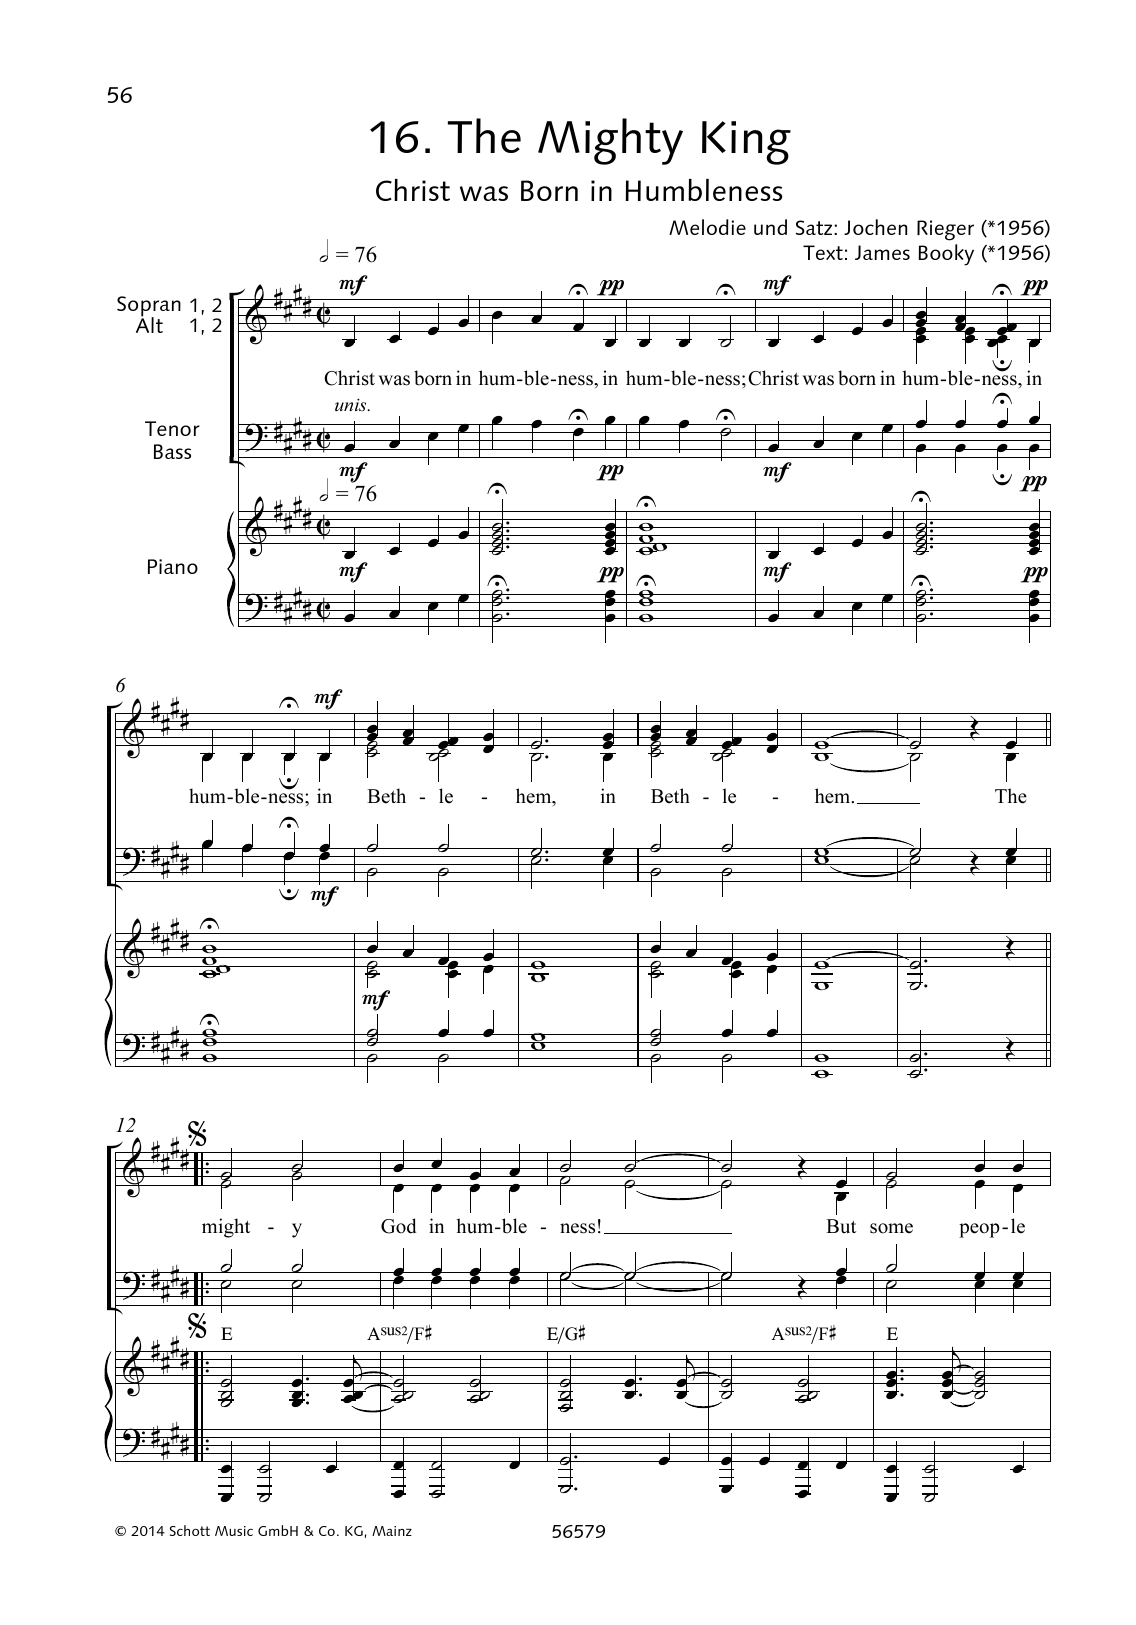 Download Jochen Rieger The Mighty King Sheet Music